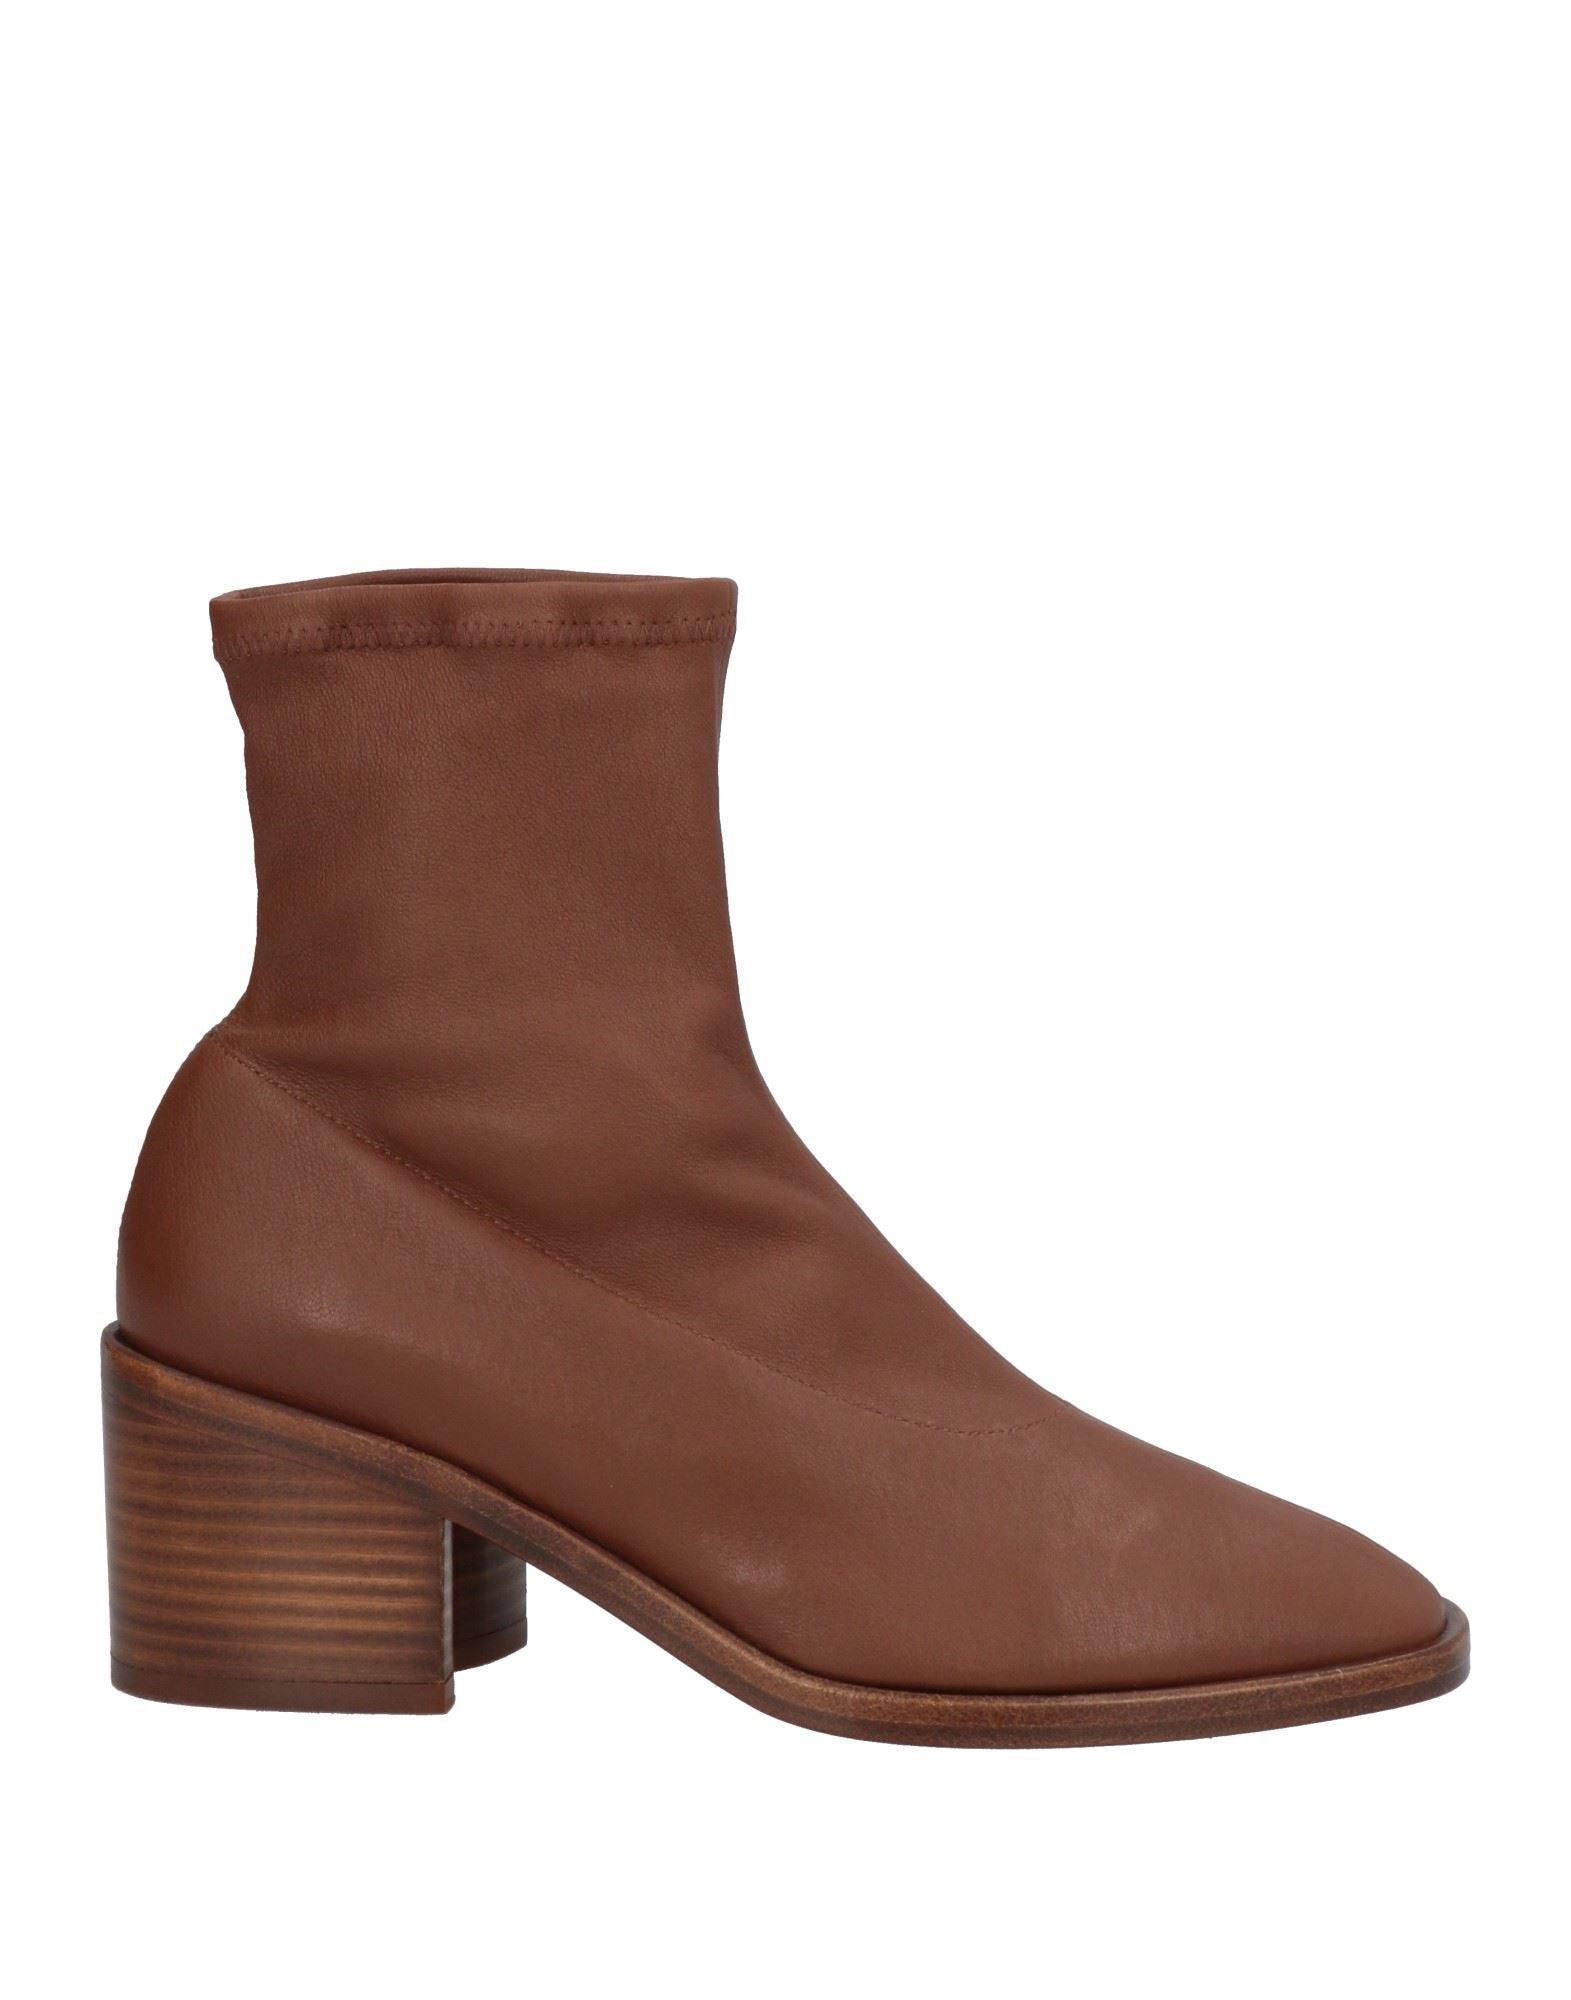 CLERGERIE ANKLE BOOTS